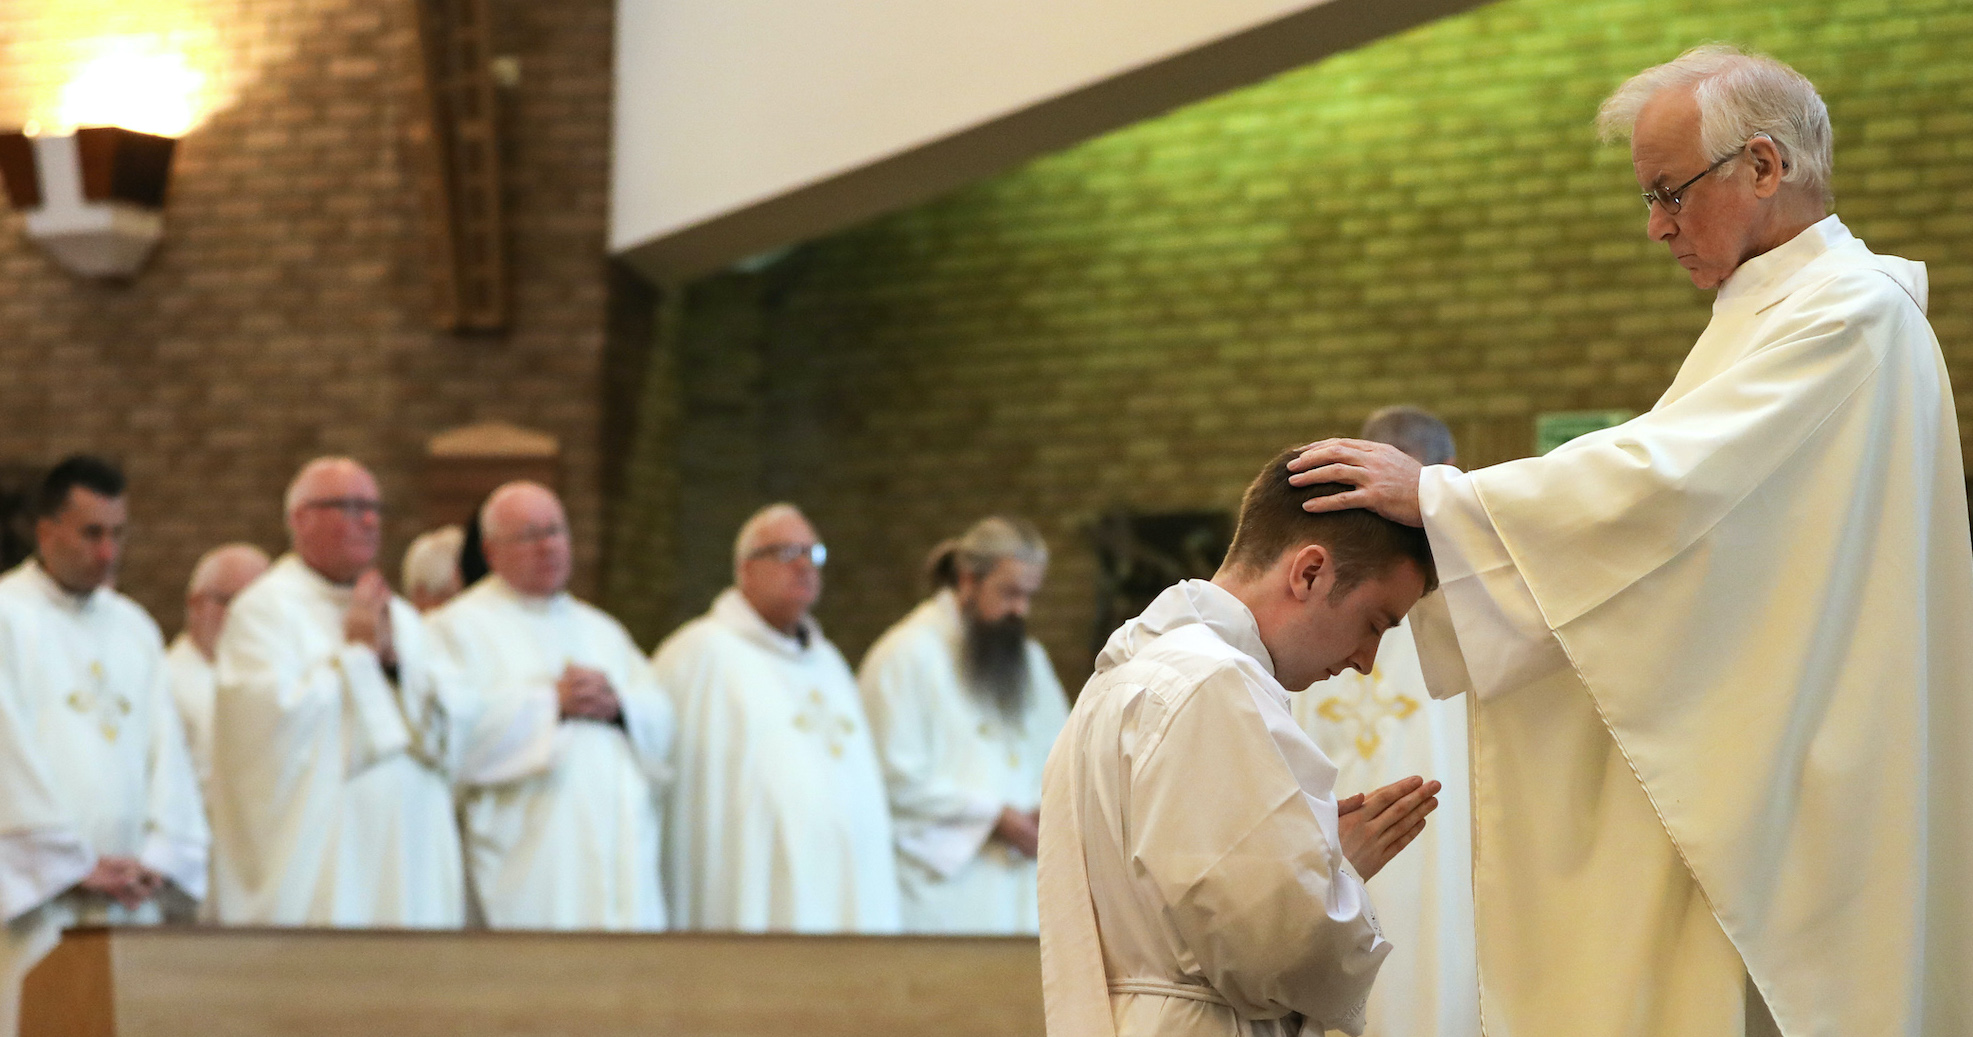 Father John Wood laying hands on the newly ordained Father Peter Taylor at St Mary's Cathedral in September 2019 – Photo by Chris Booth